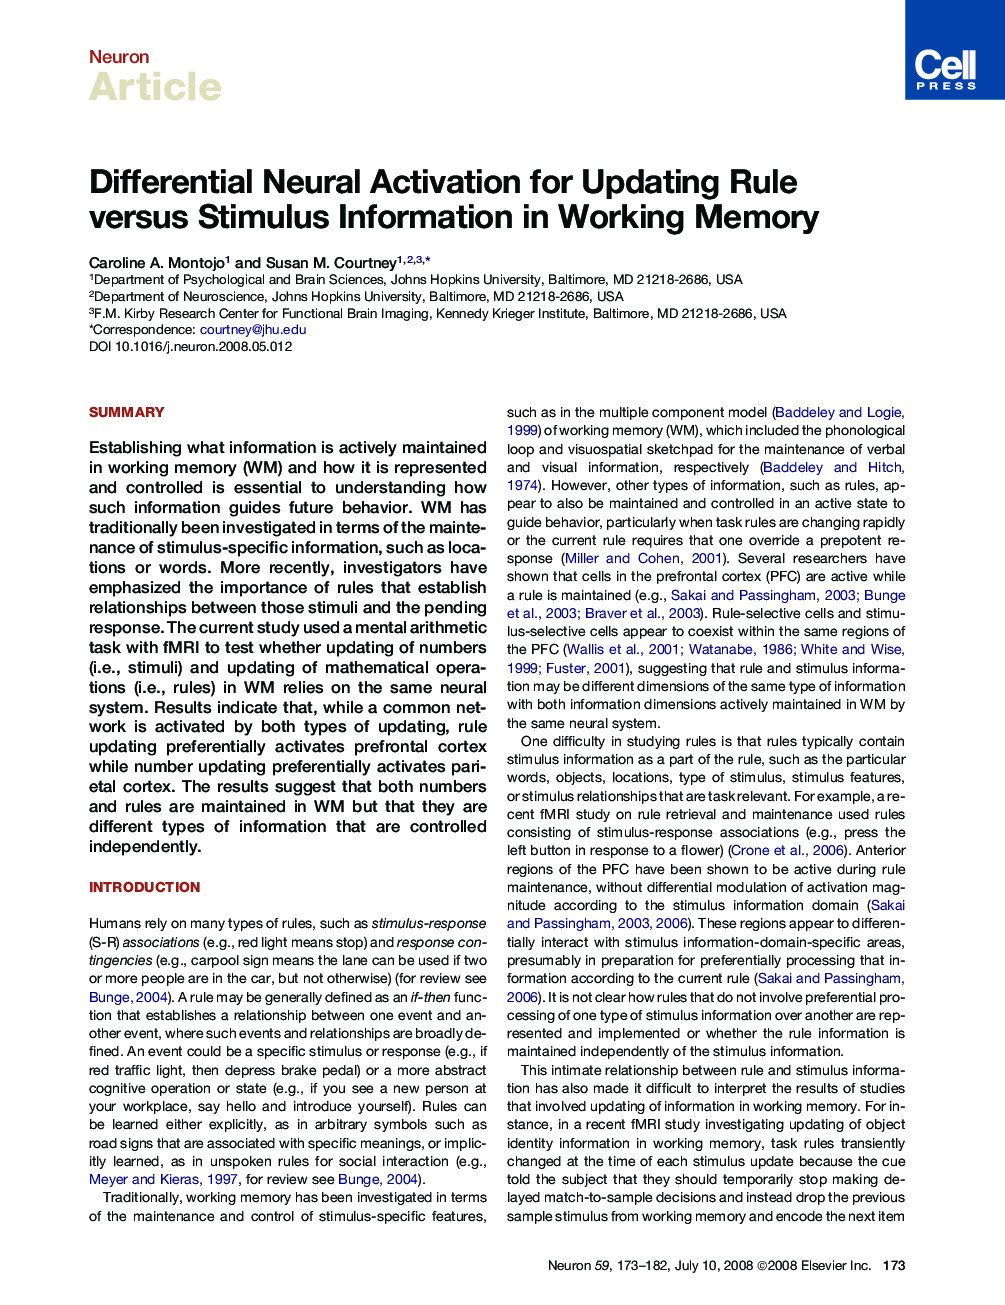 Differential Neural Activation for Updating Rule versus Stimulus Information in Working Memory